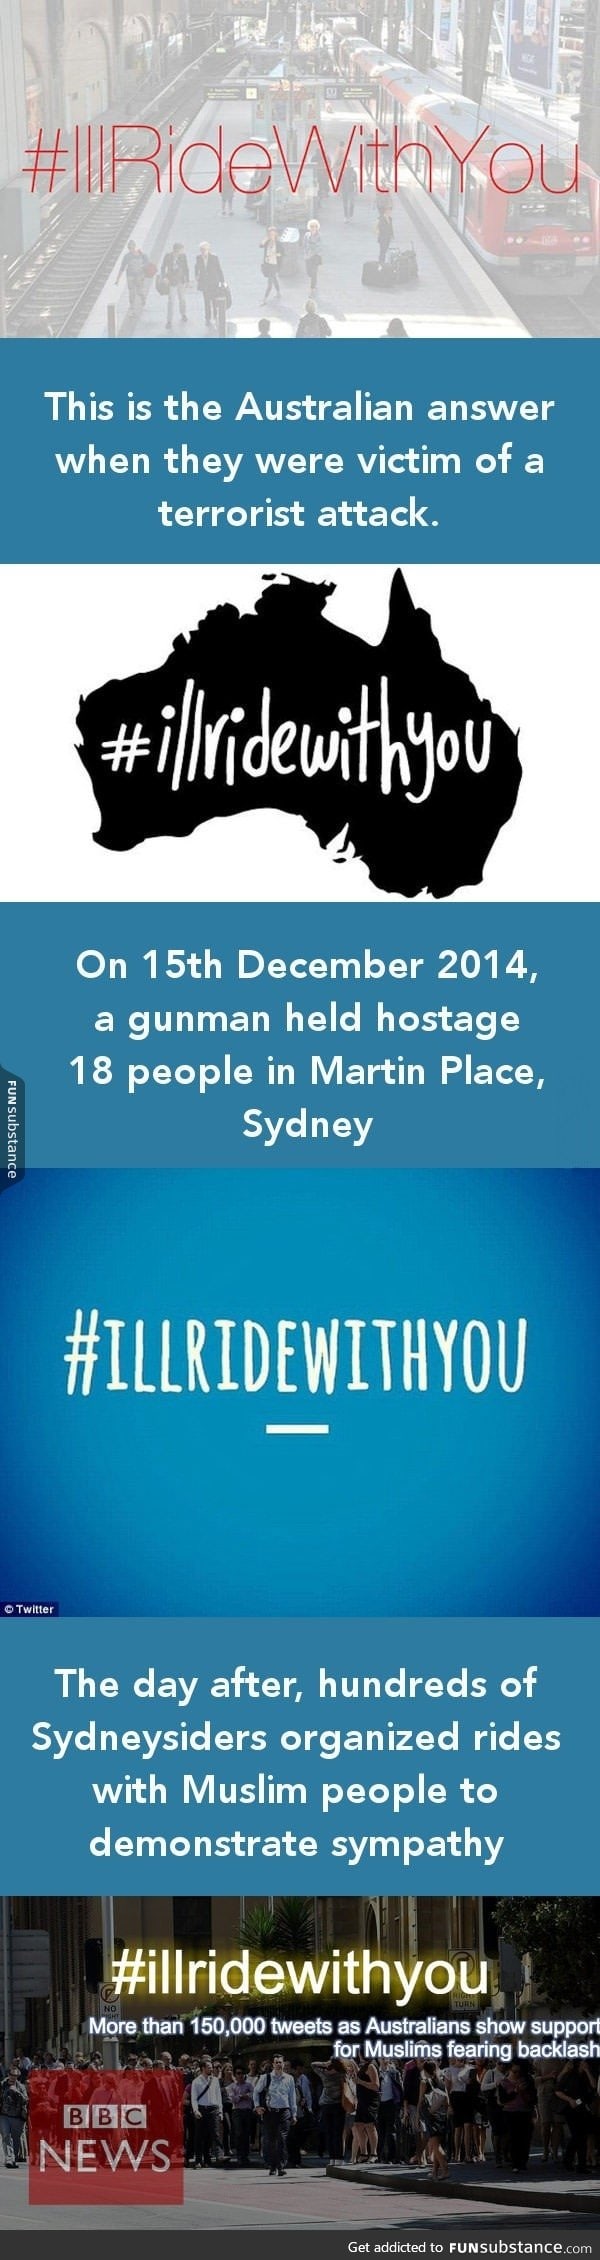 This is how Australia reacts to a terrorist attack